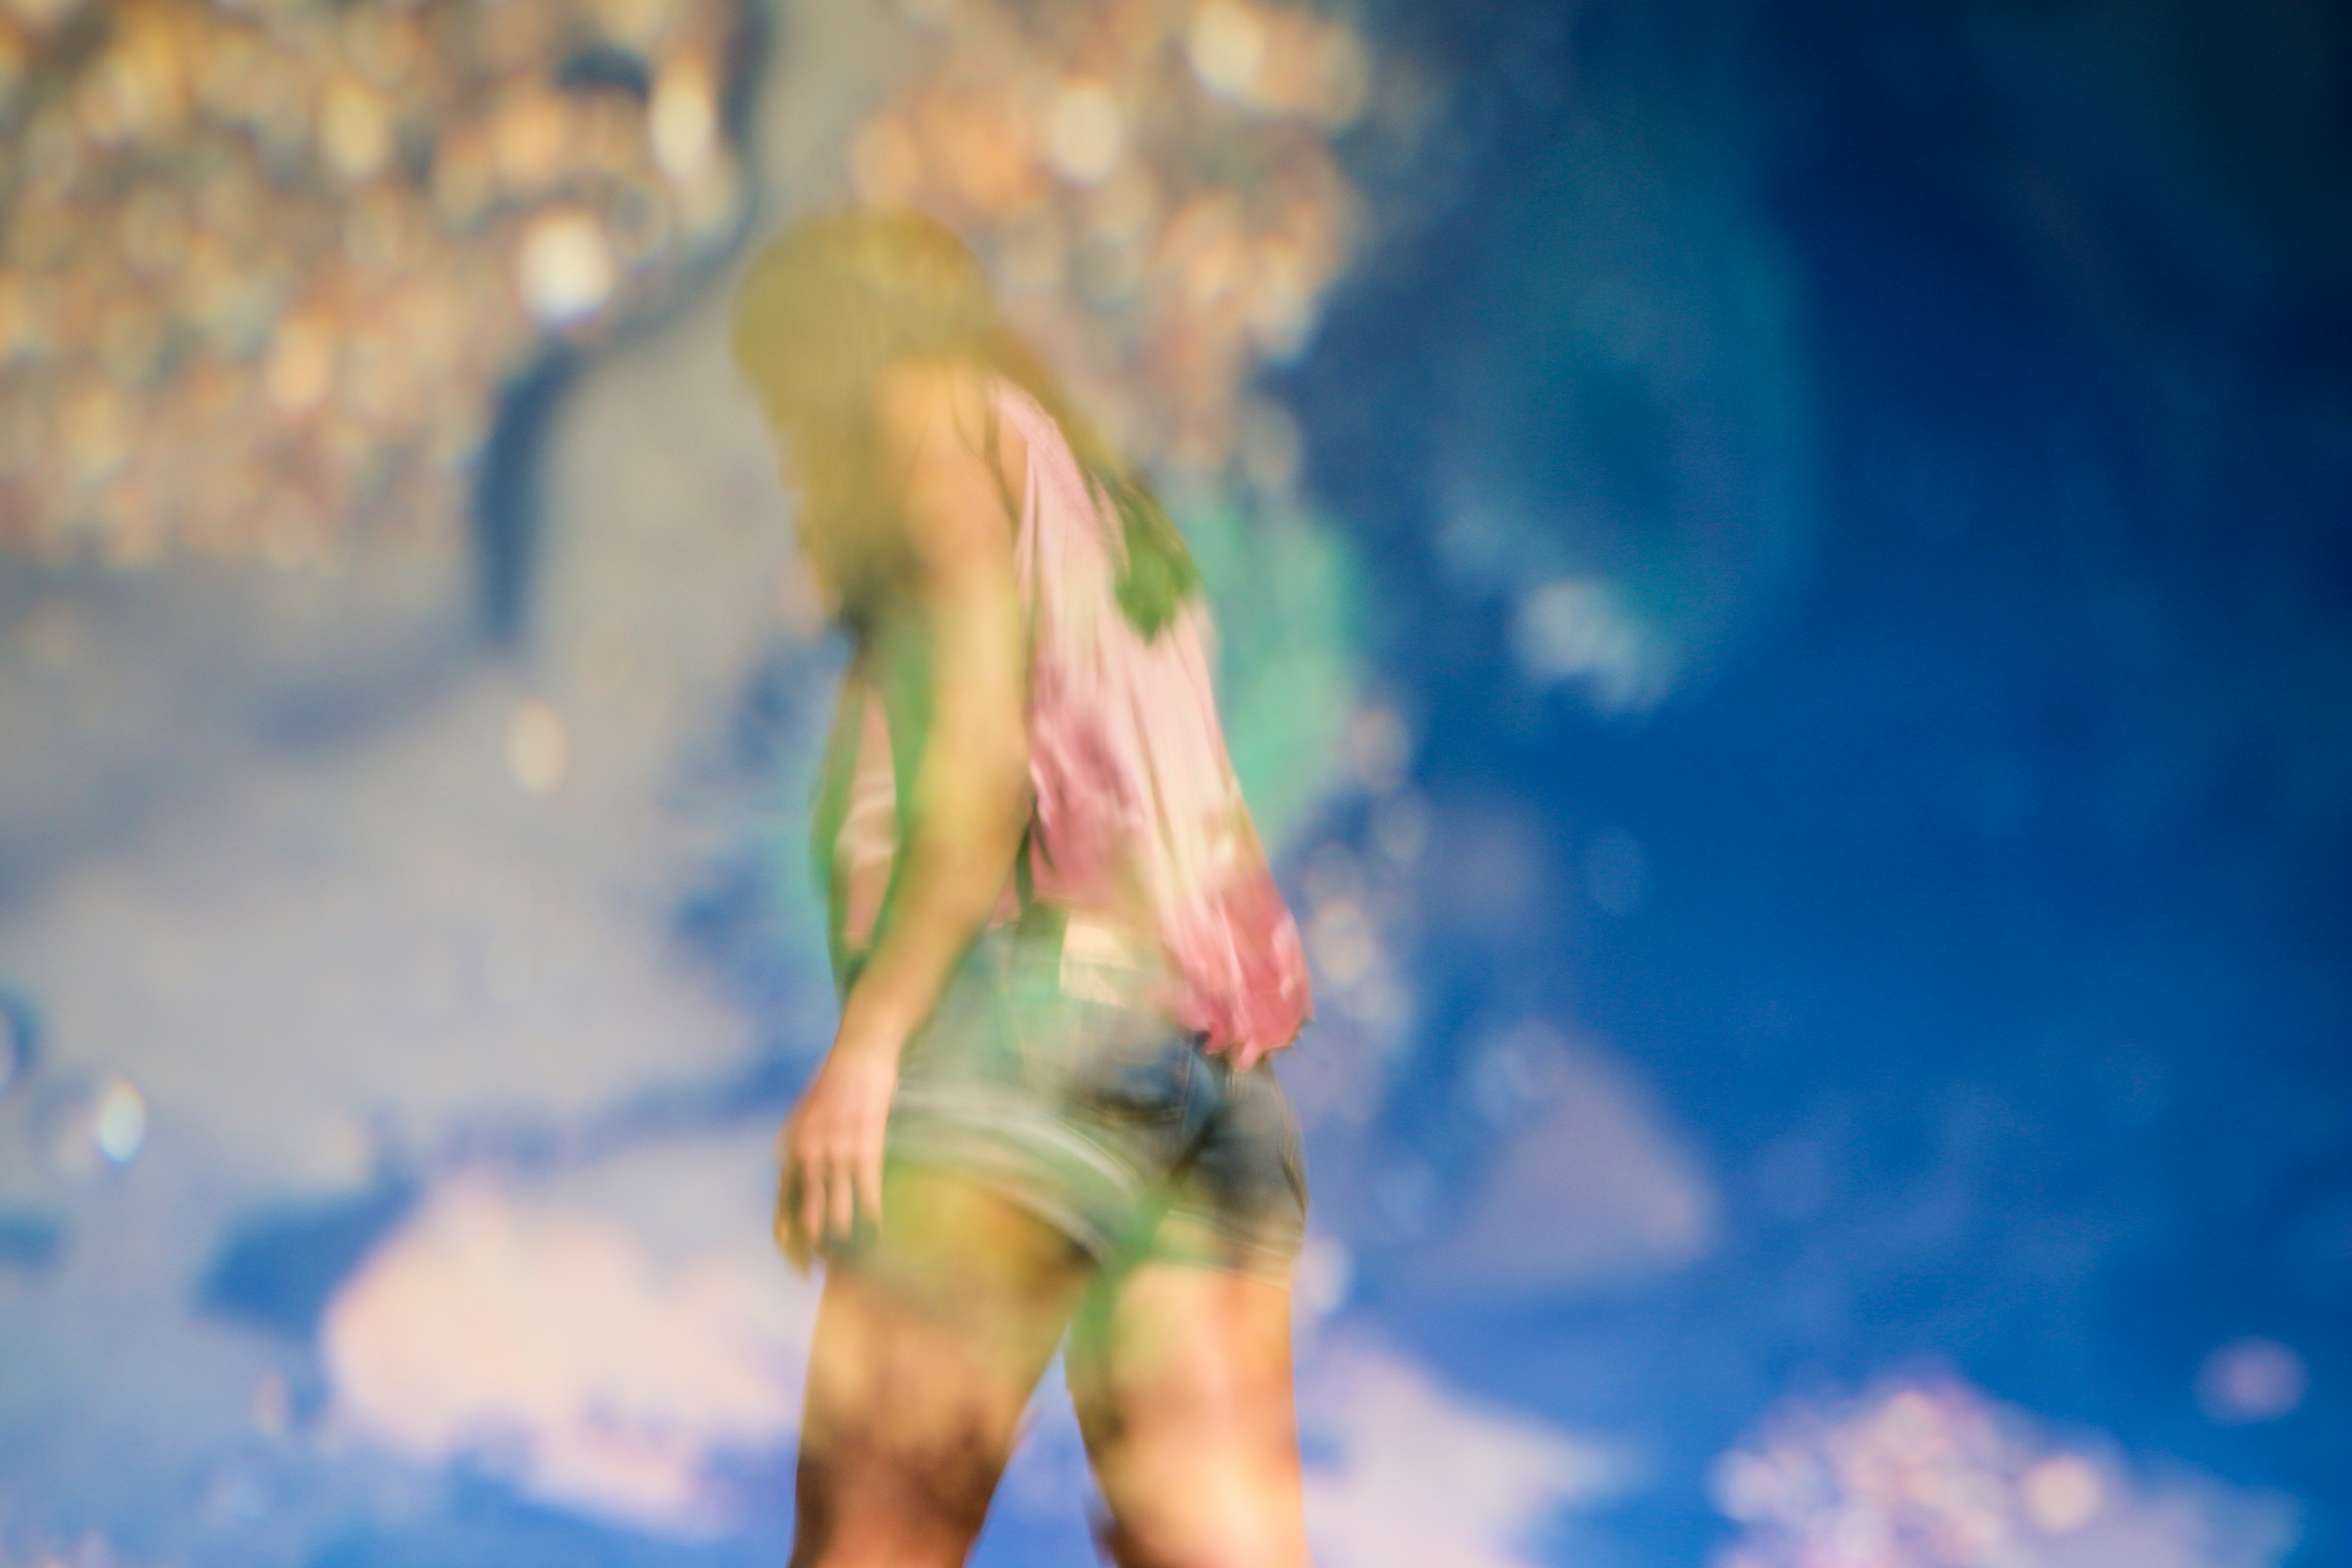 A blurry shot of a woman in shorts against a blue sky